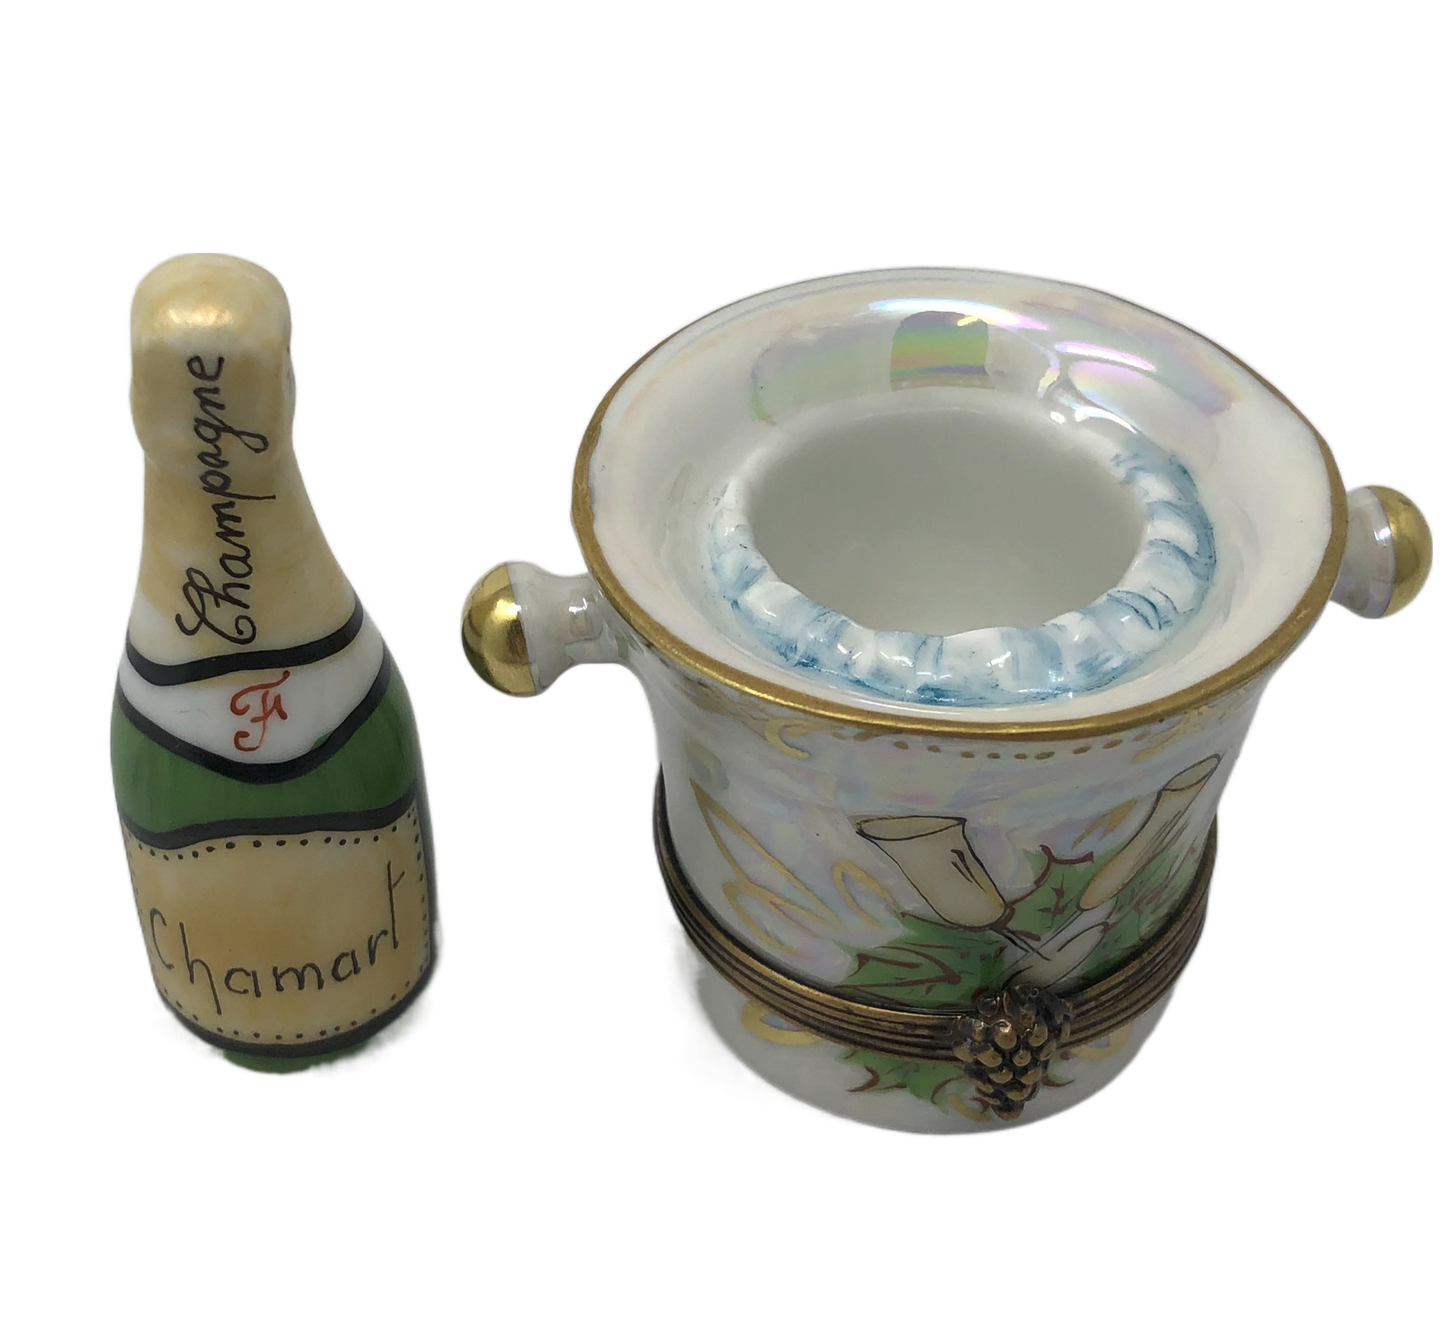 Elegance in a Limoges Box: Champagne Bucket and Bottle